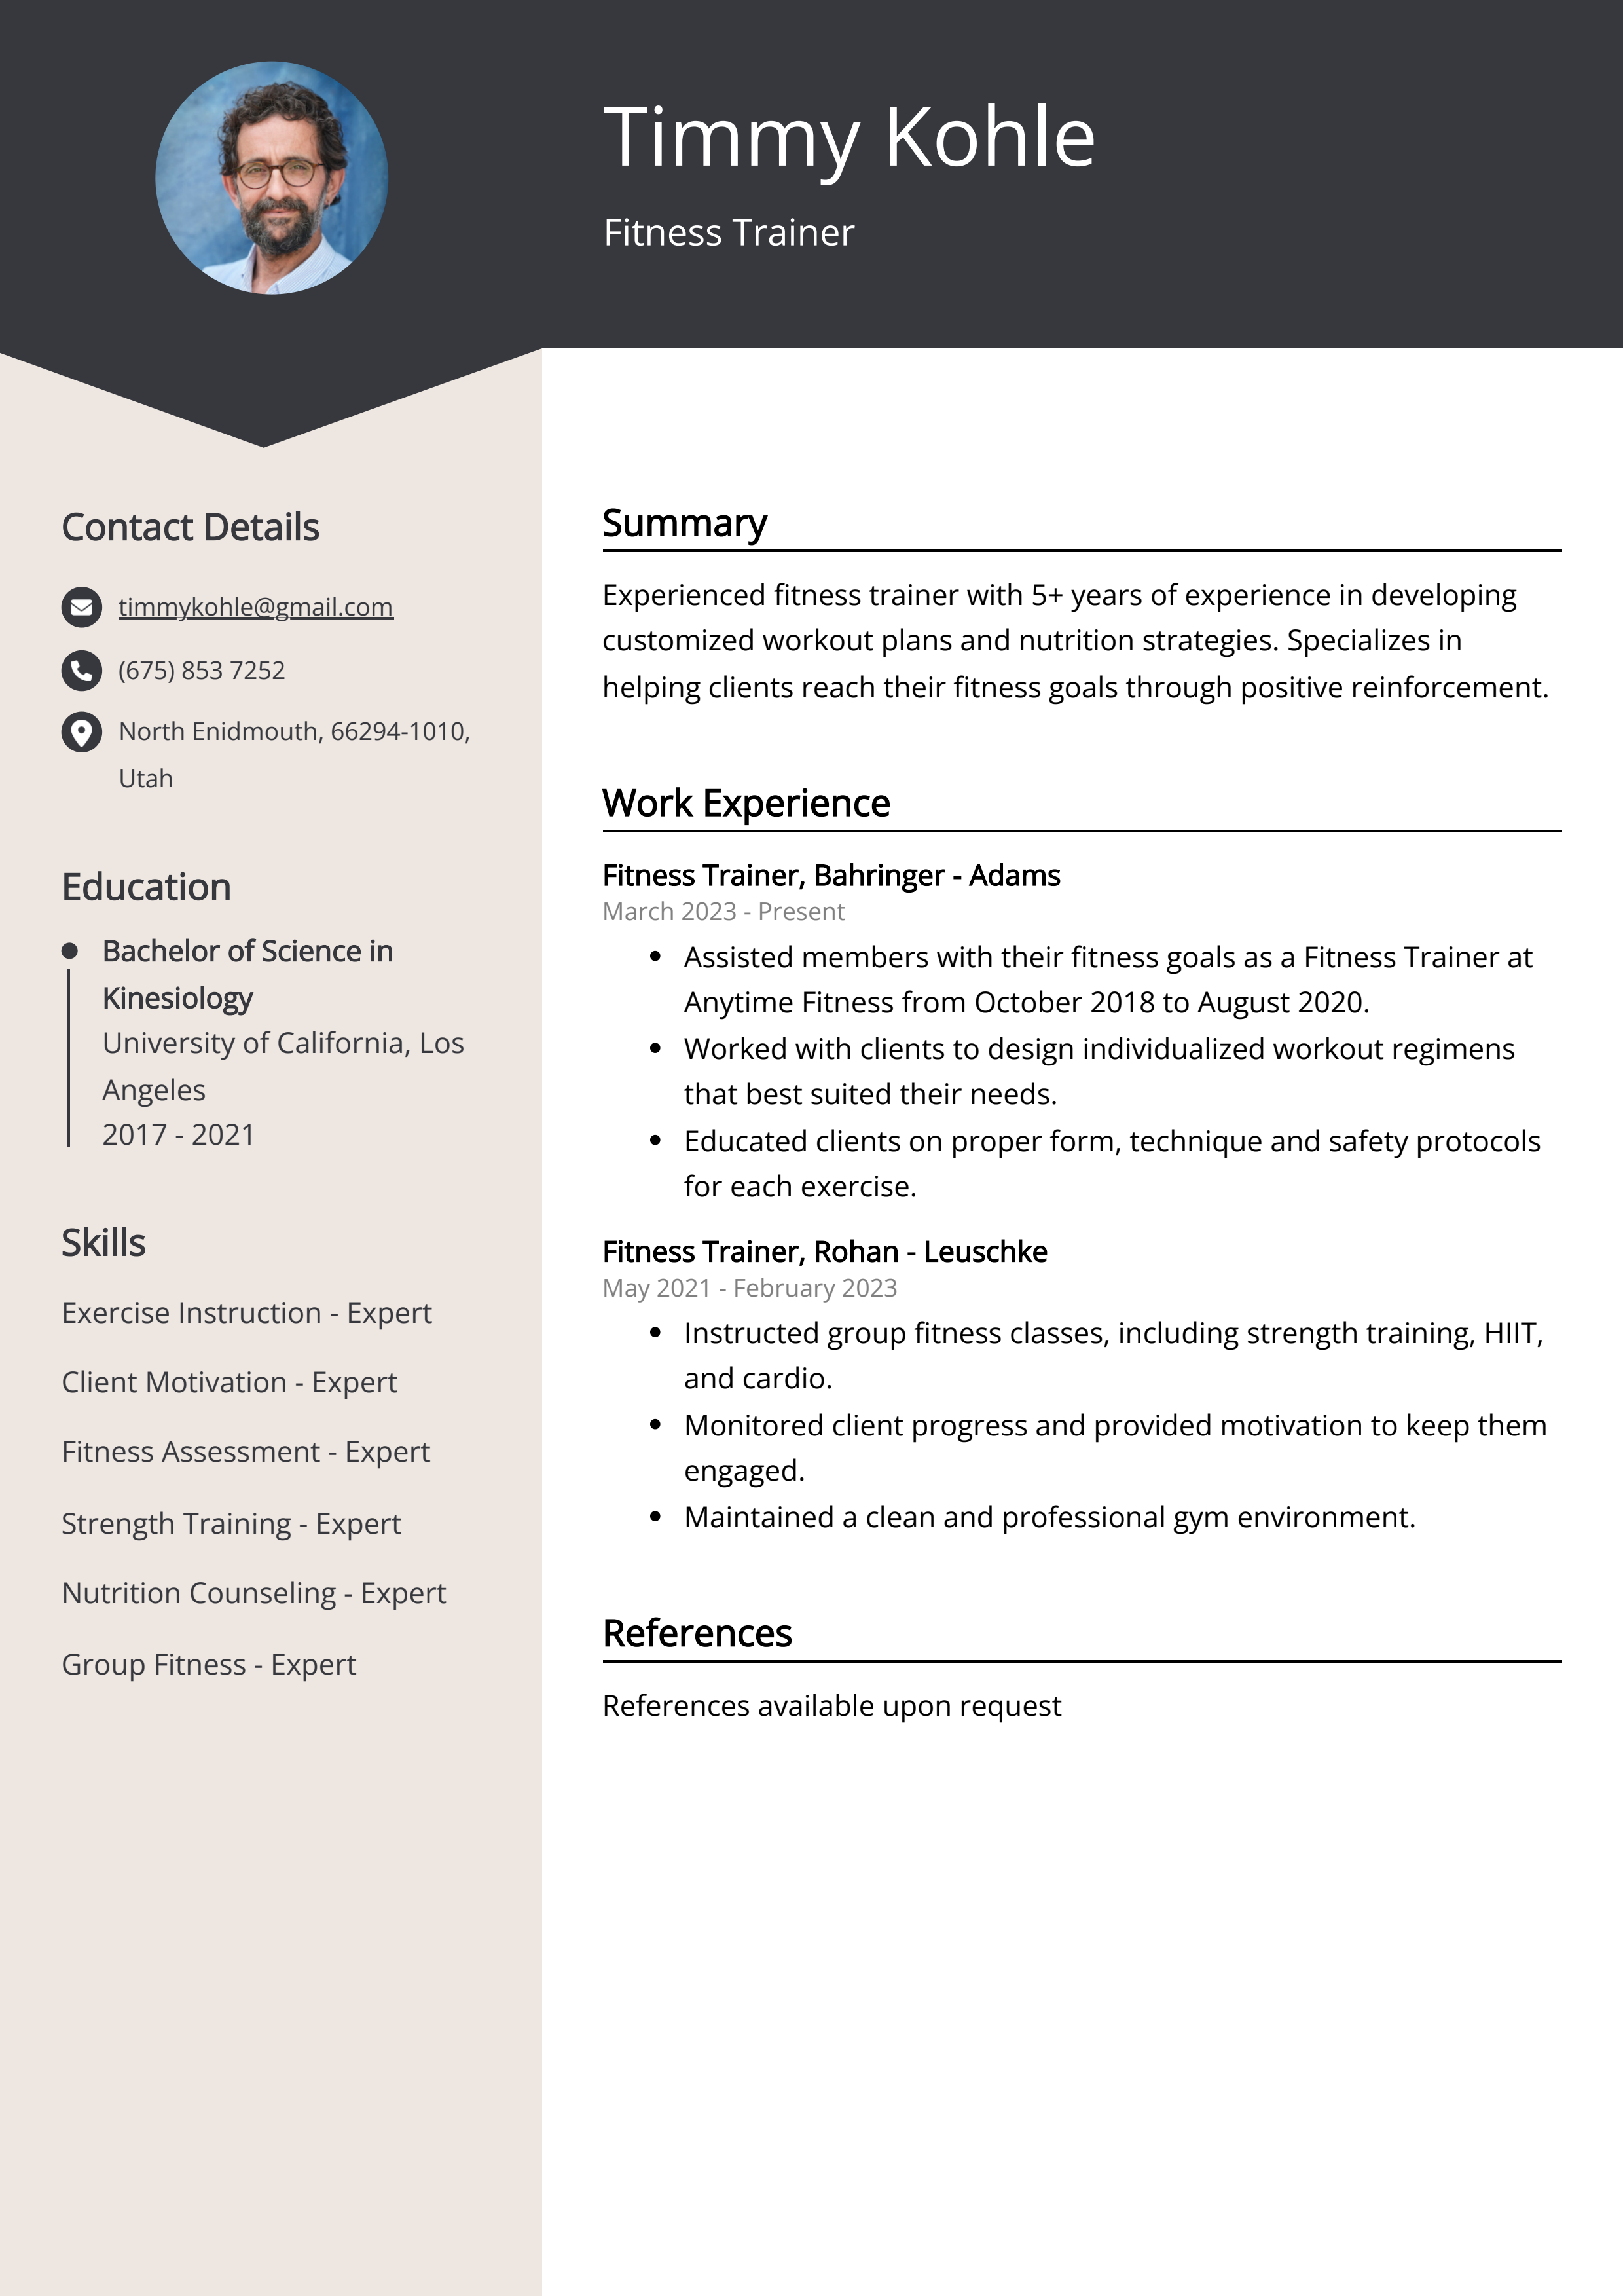 https://resumaker.ai/s3/en-US/resume-examples/Fitness-Trainer-Resume-Example.png